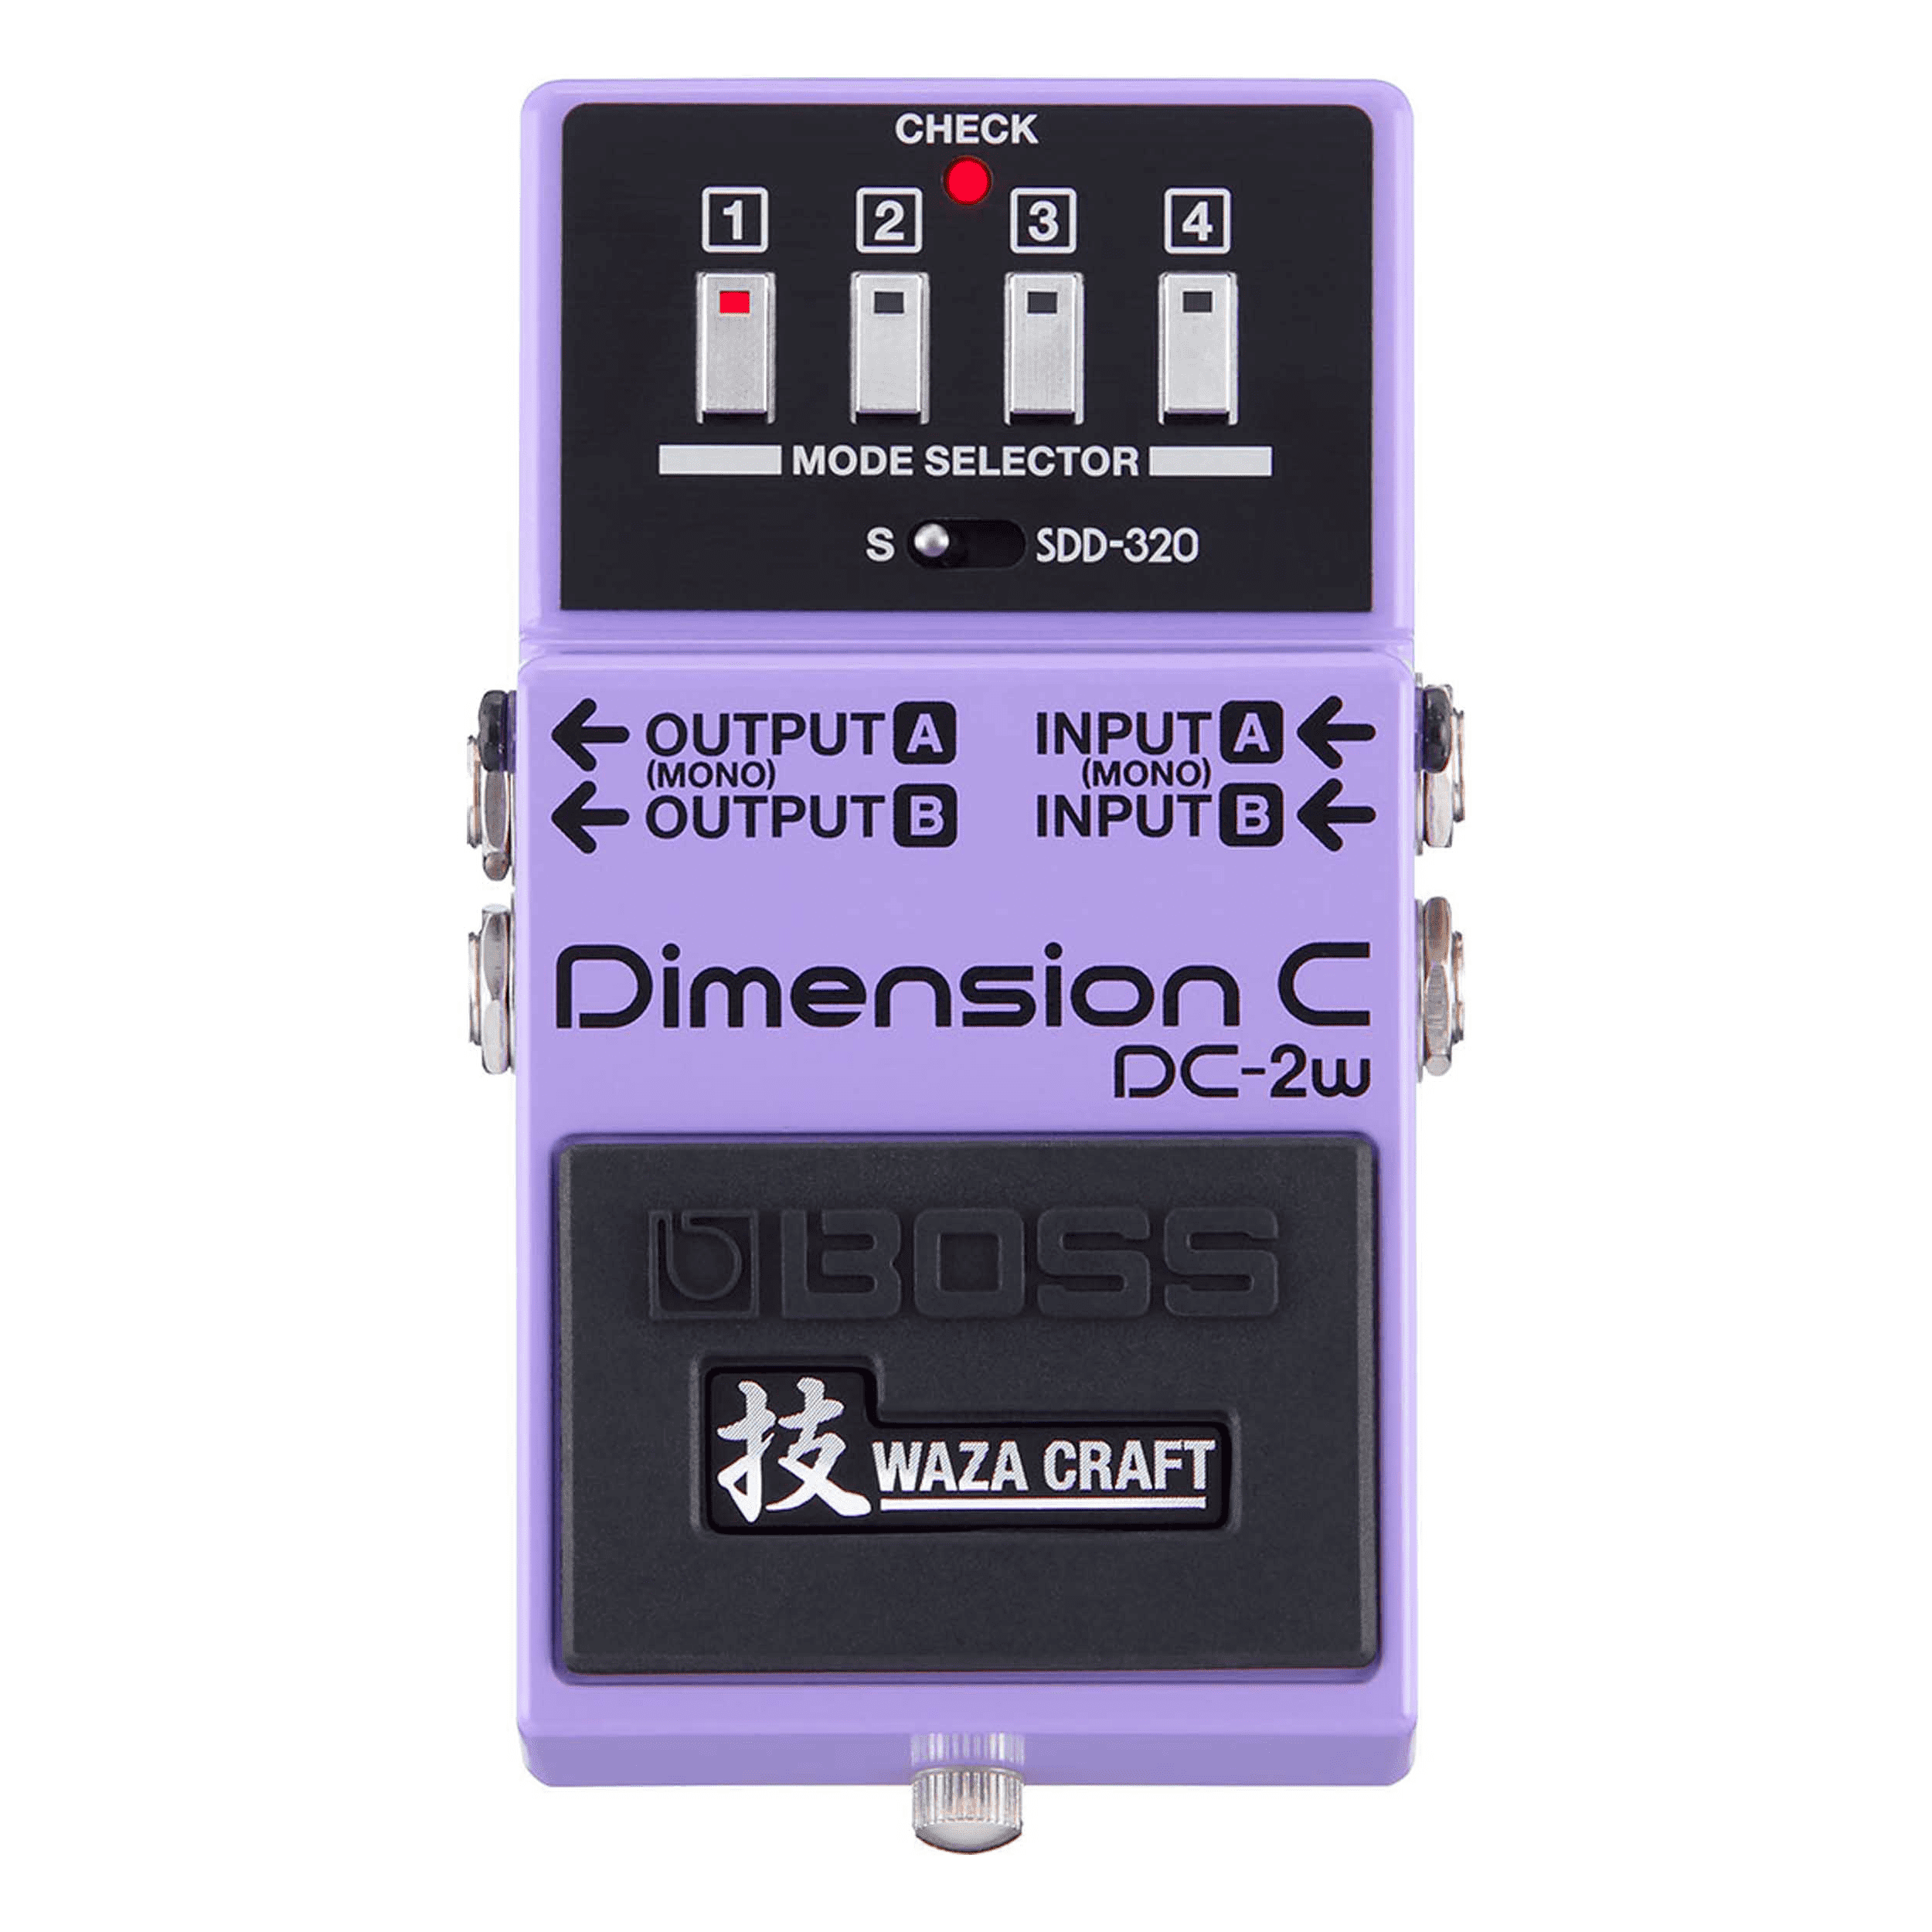 Boss DC-2w Waza Craft Dimension C  Effects Pedal